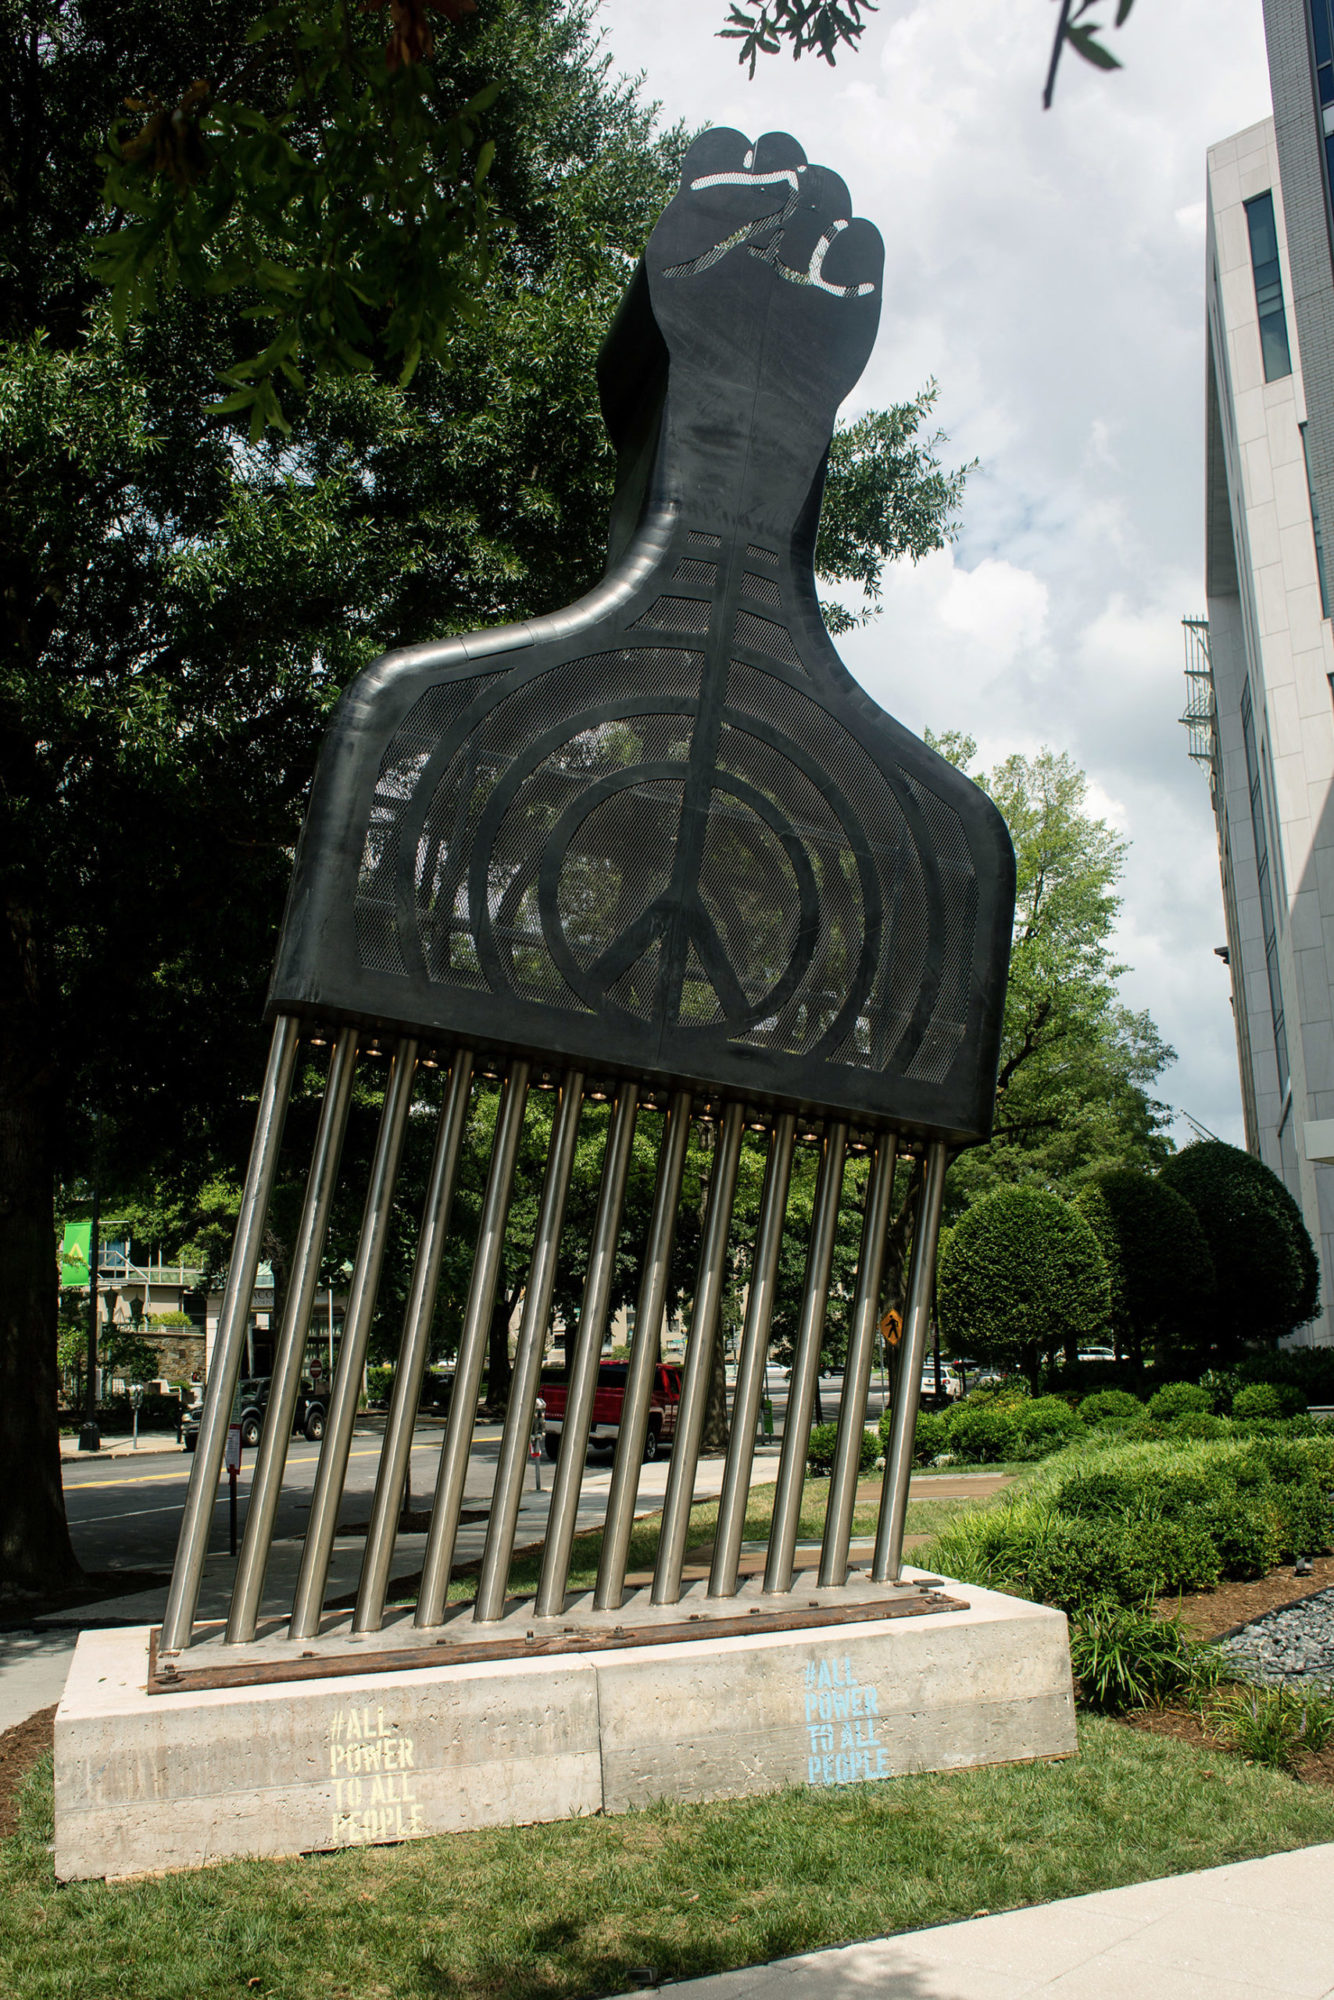 A large sculpture of a hair pick with a fist pointing outward on its handle and a peace sign in the center. The pick is stuck sideways into a plot of concrete over grass.